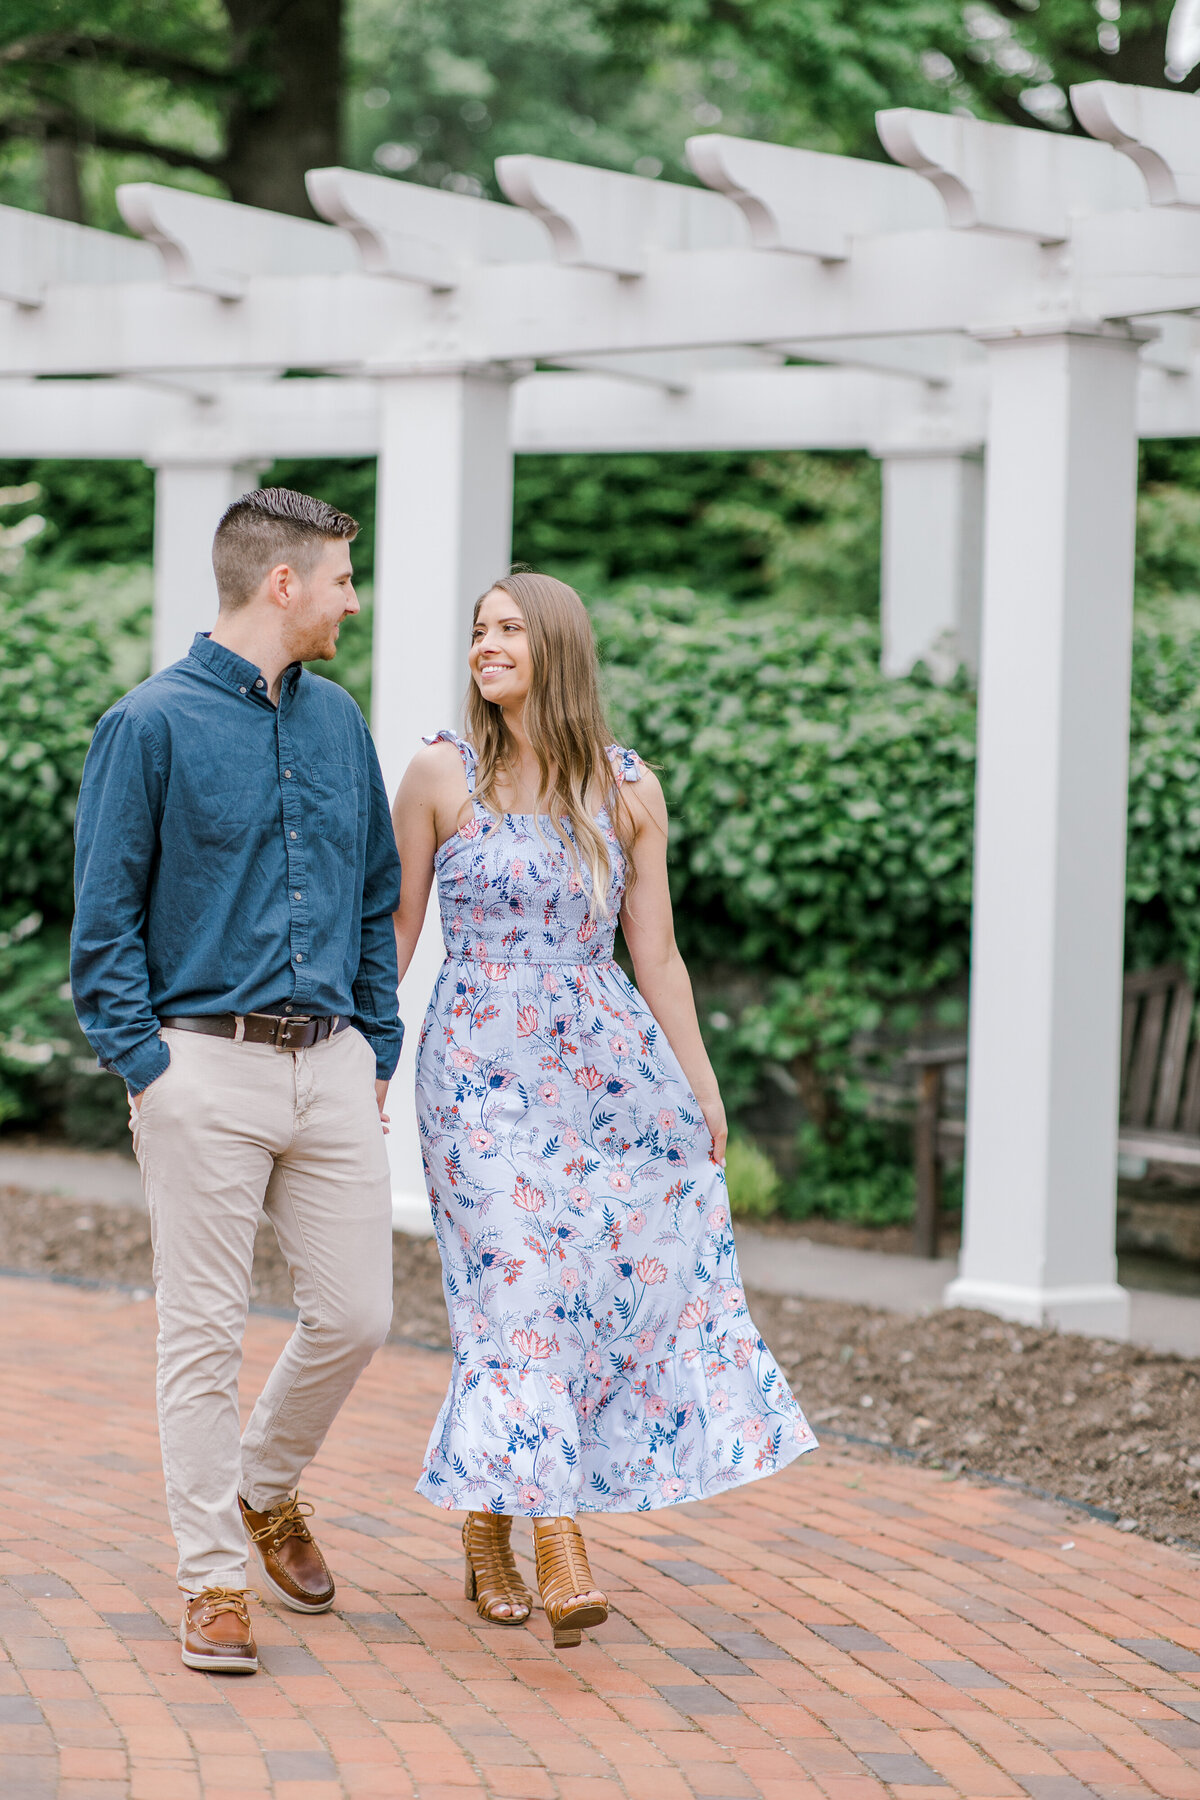 Hershey Garden Engagement Session Photography Photo-33